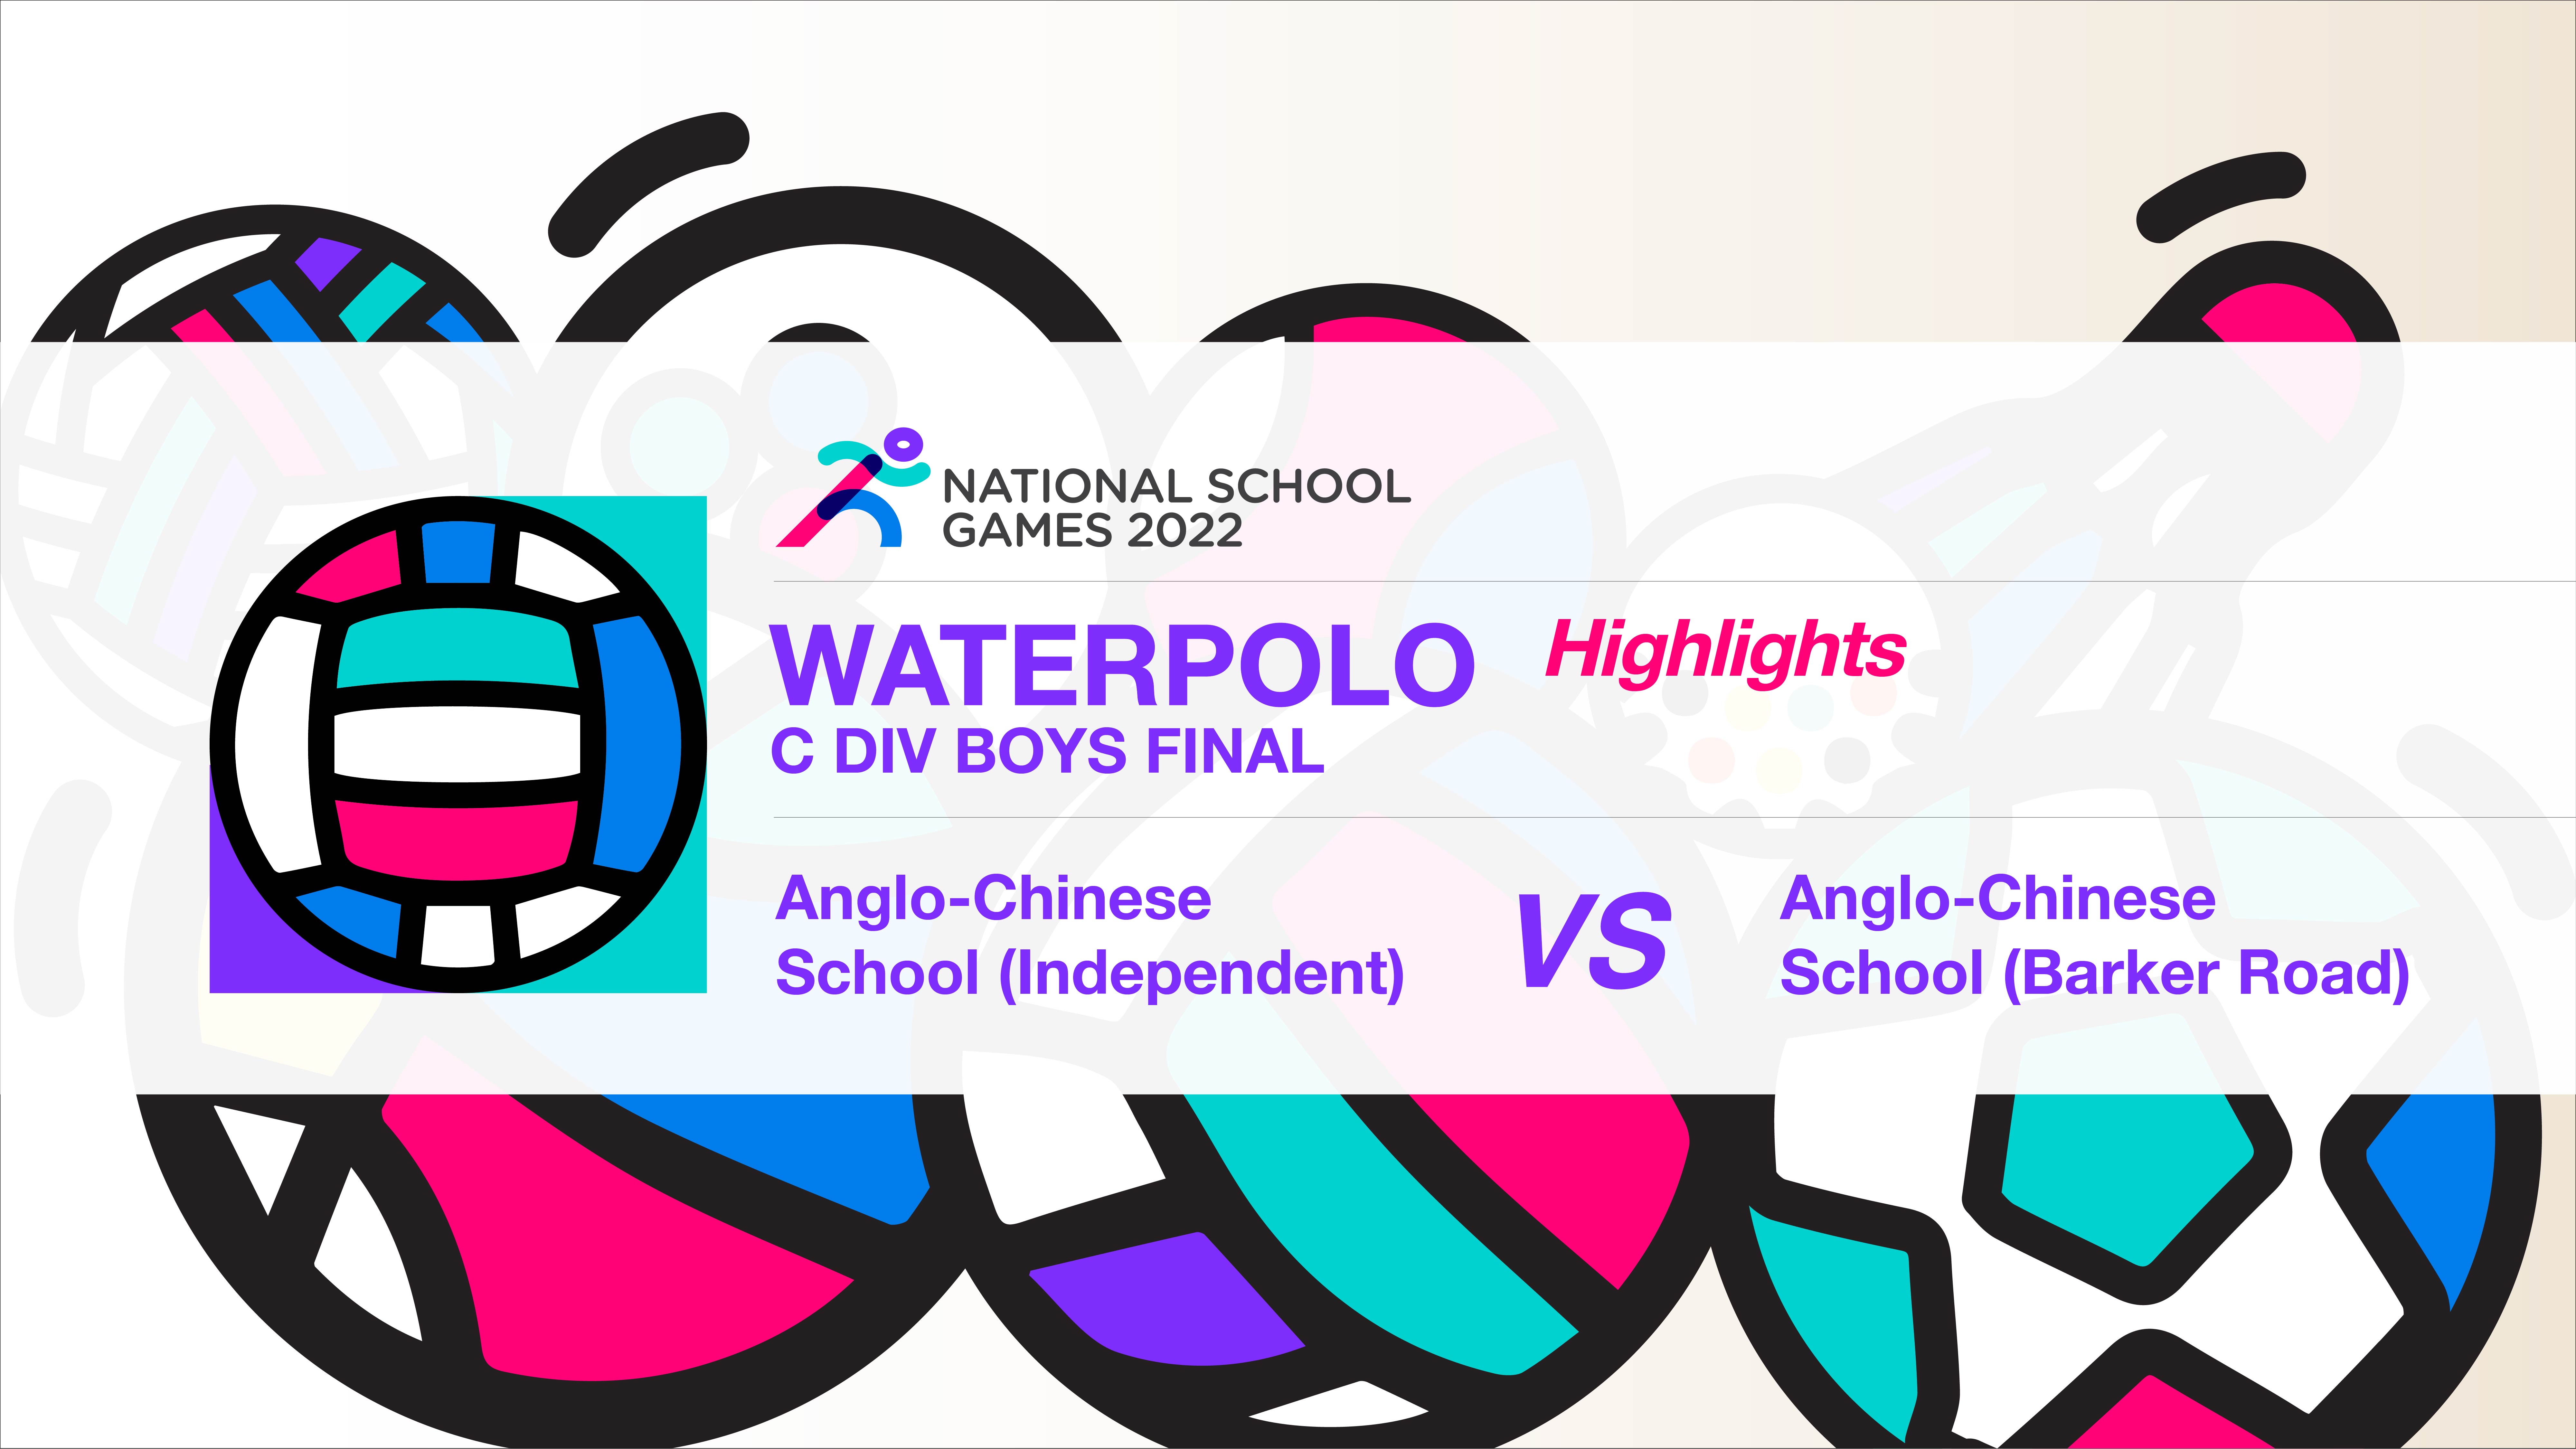 SSSC Water Polo National C Division Boys Final | Anglo-Chinese School (Independent) vs Anglo-Chinese School (Barker Road) - Highlights